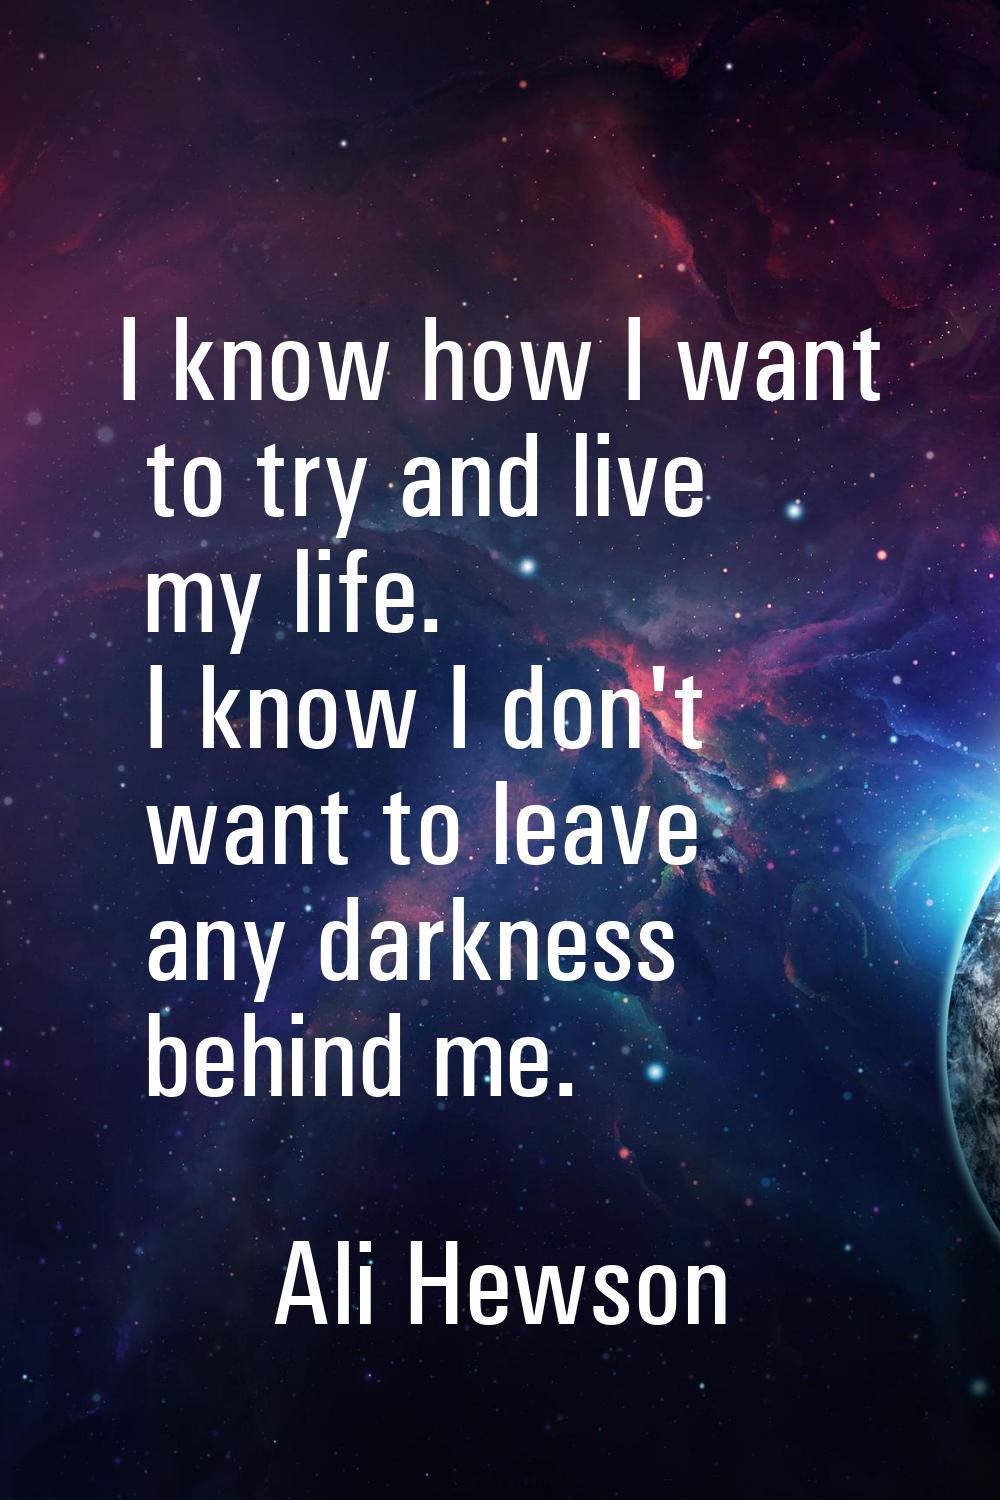 I know how I want to try and live my life. I know I don't want to leave any darkness behind me.